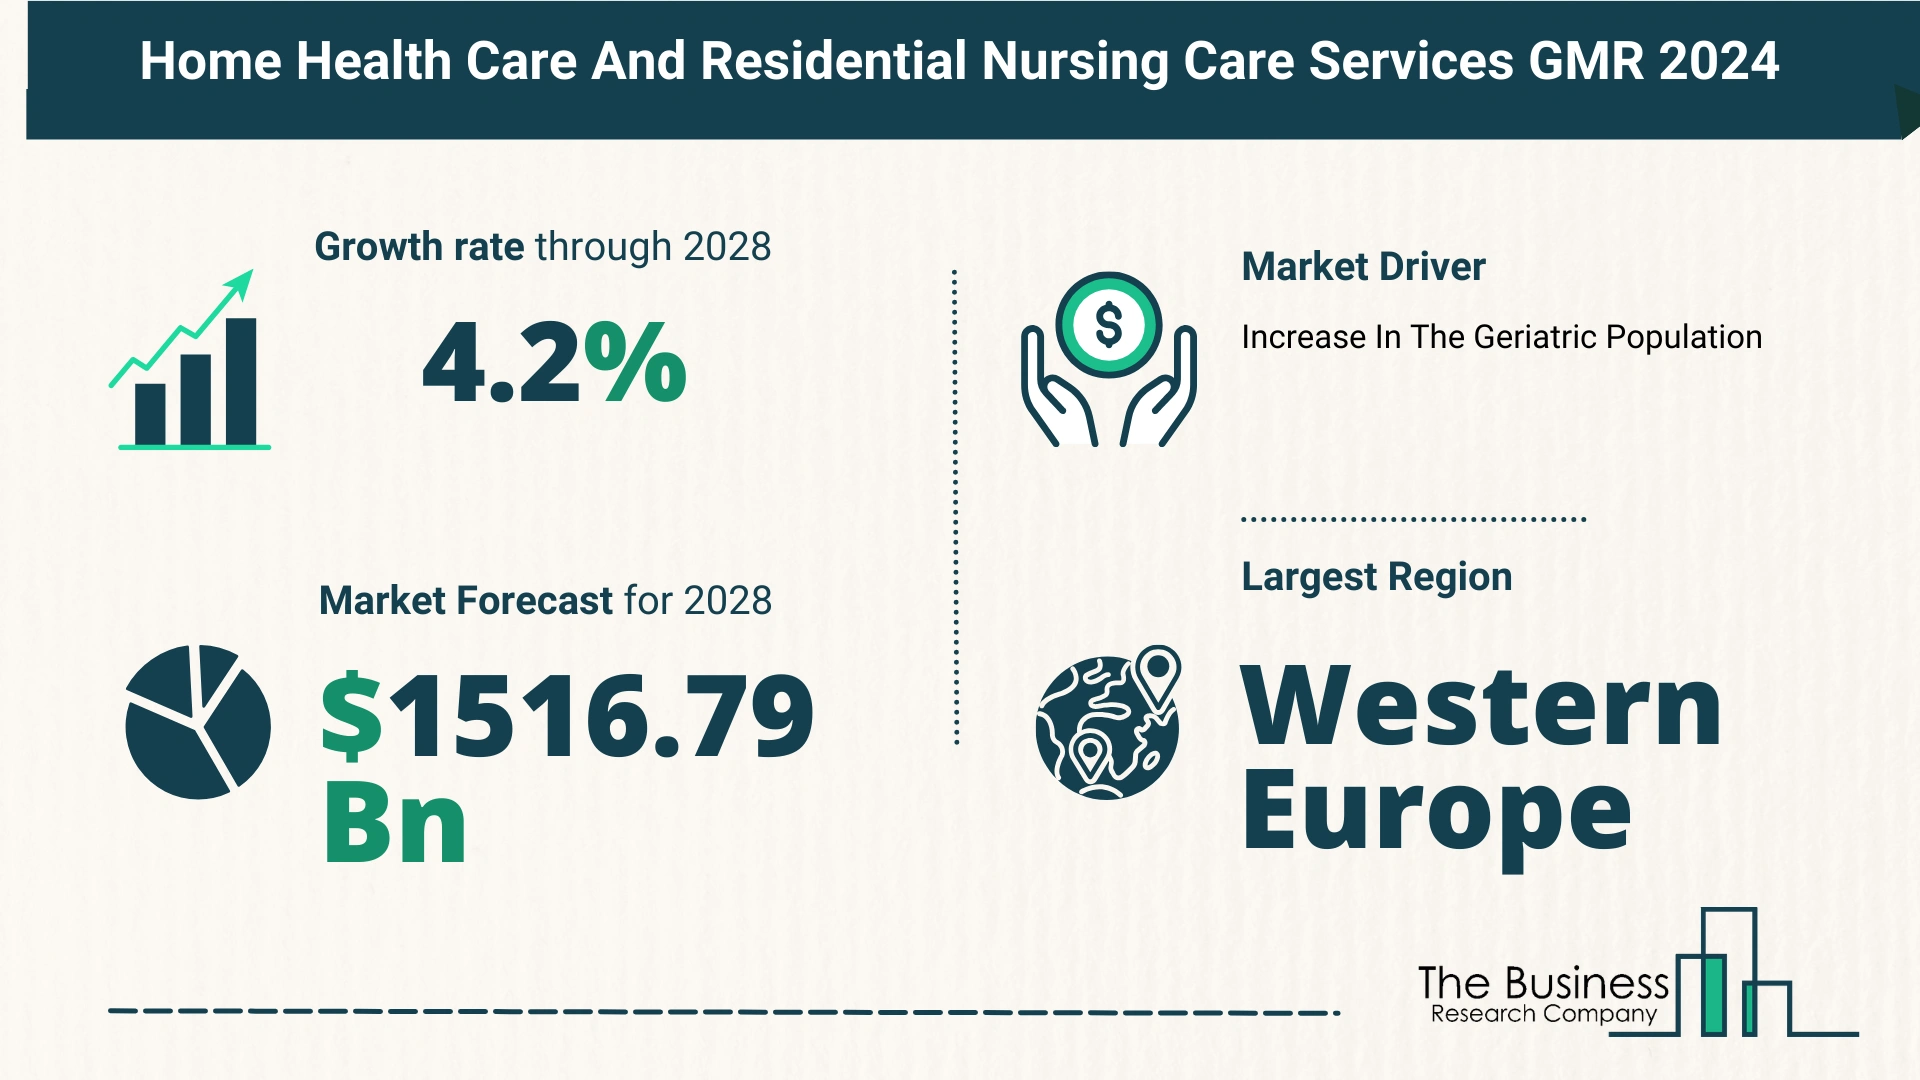 Global Home Health Care And Residential Nursing Care Services Market Analysis 2024: Size, Share, And Key Trends